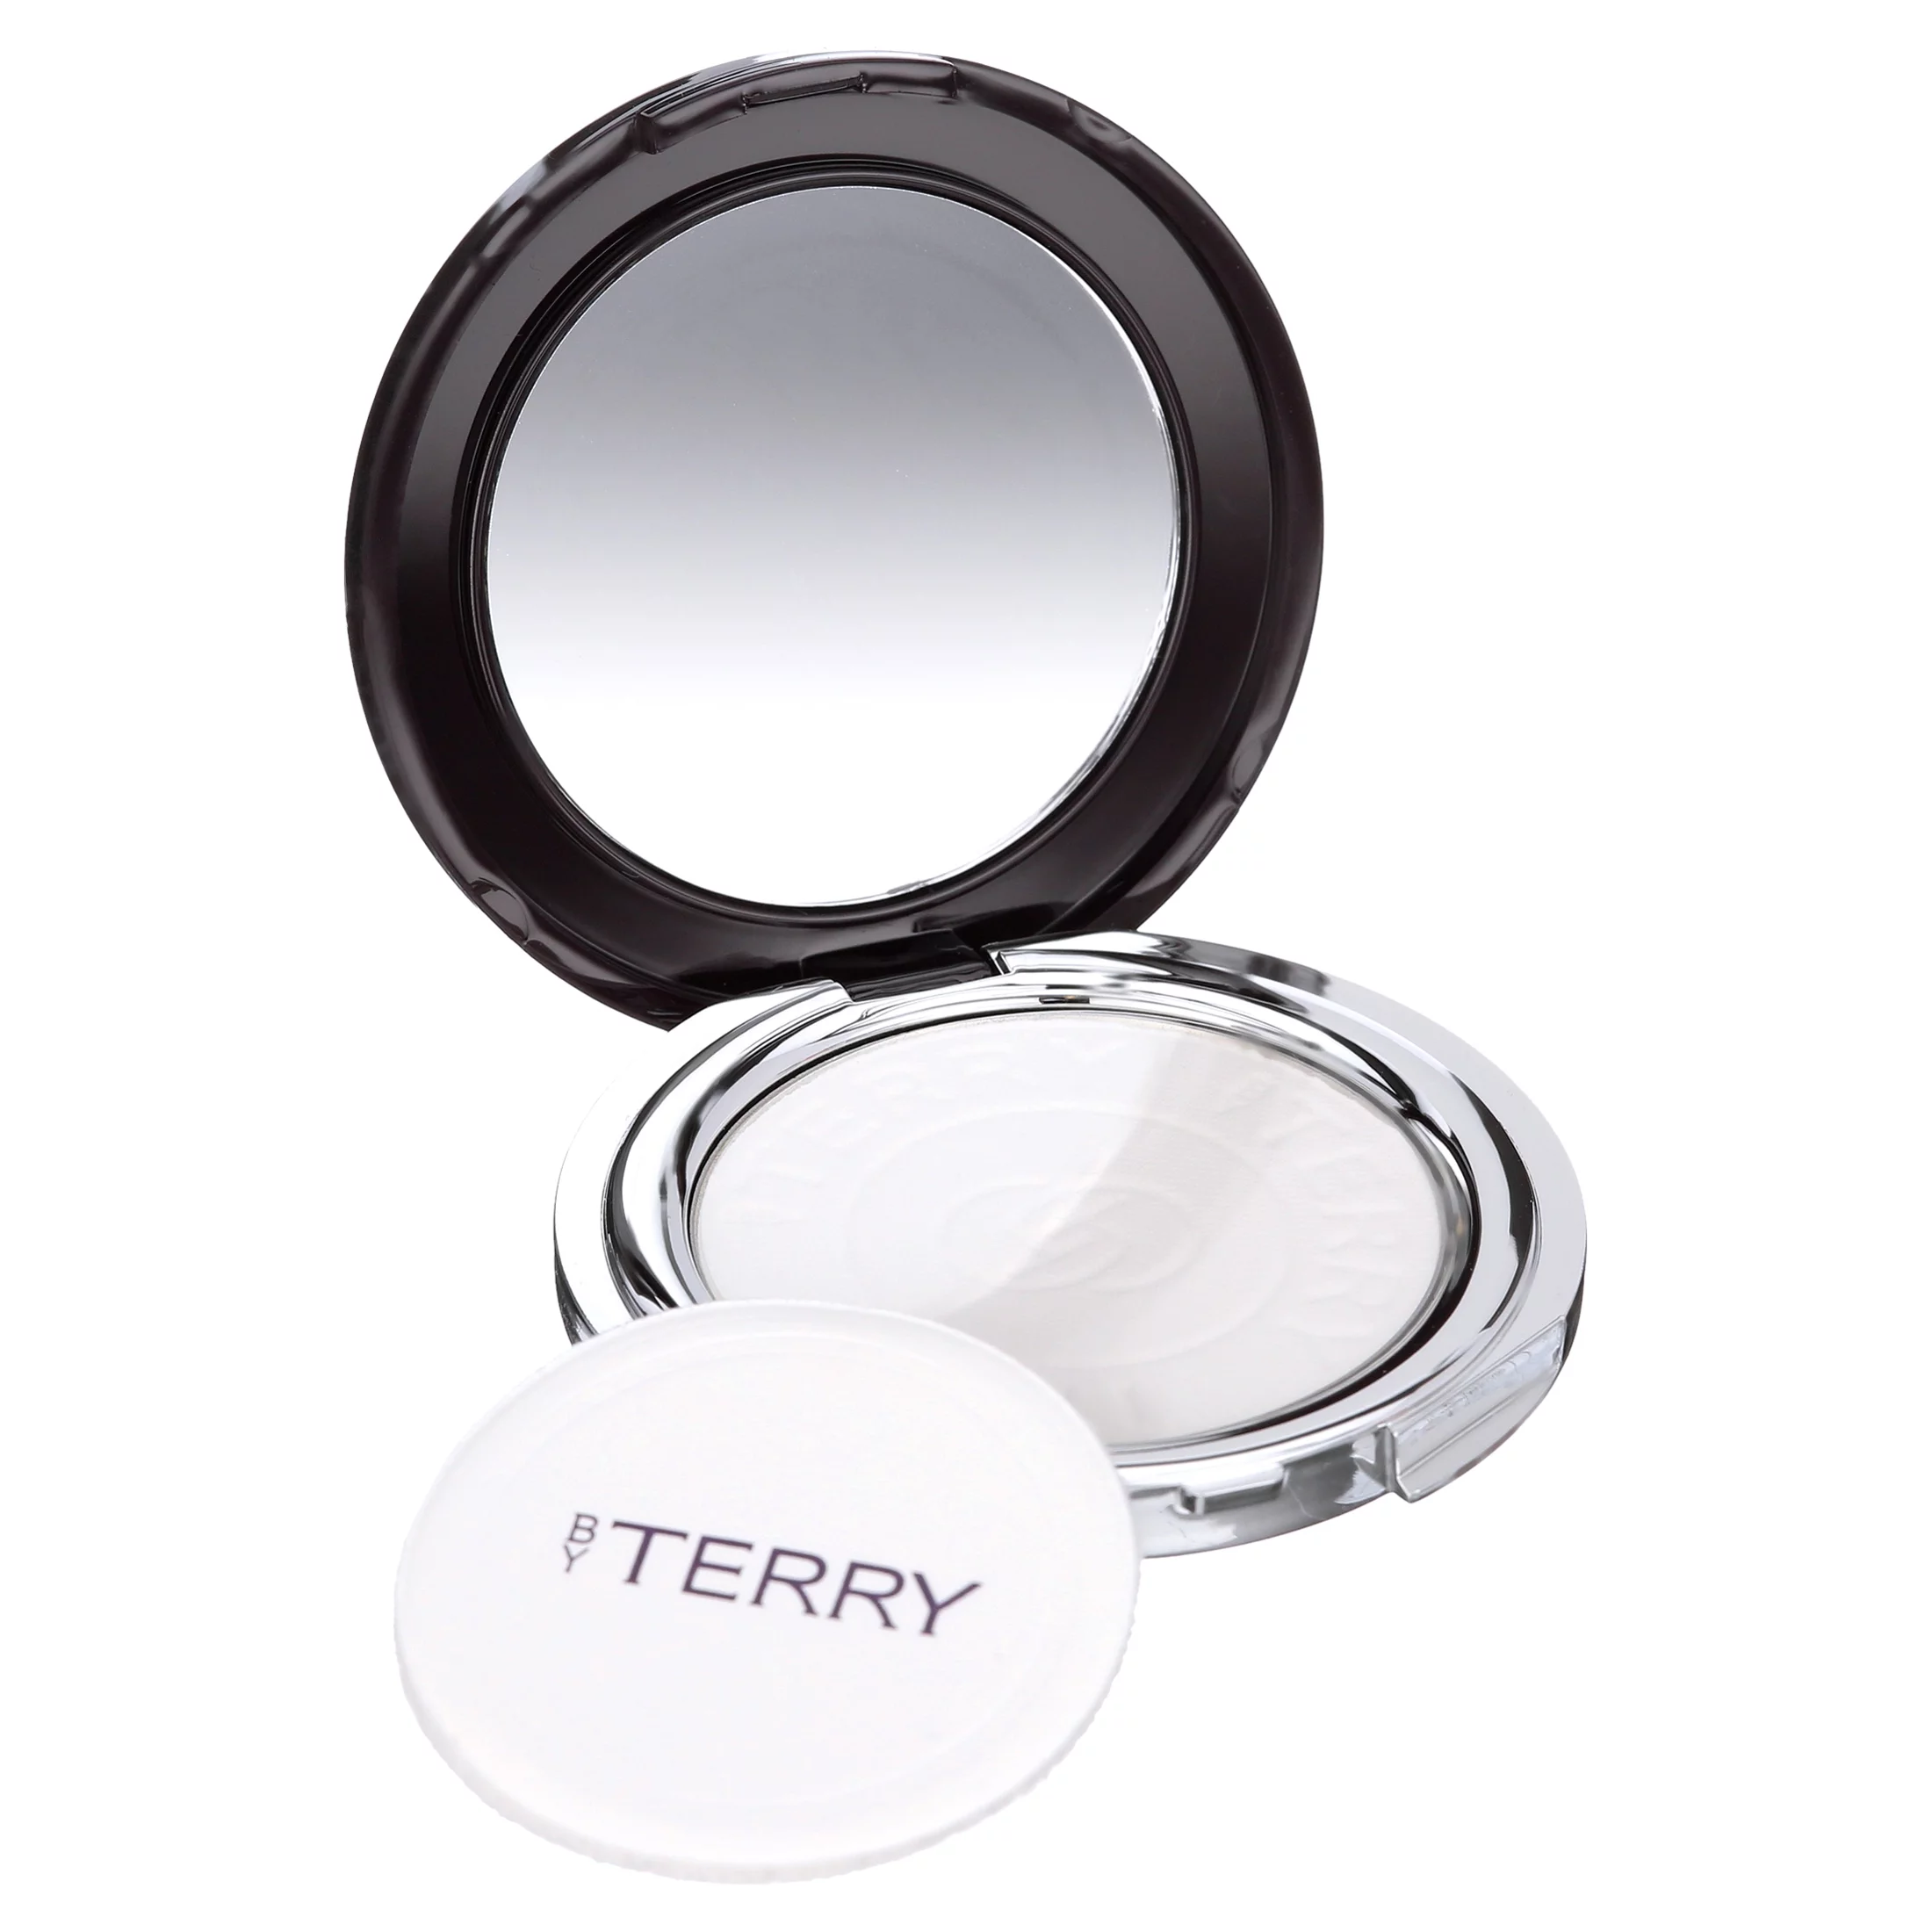 By Terry Hyaluronic Hydra Pressed Powder, 0.8 oz, Travel Size